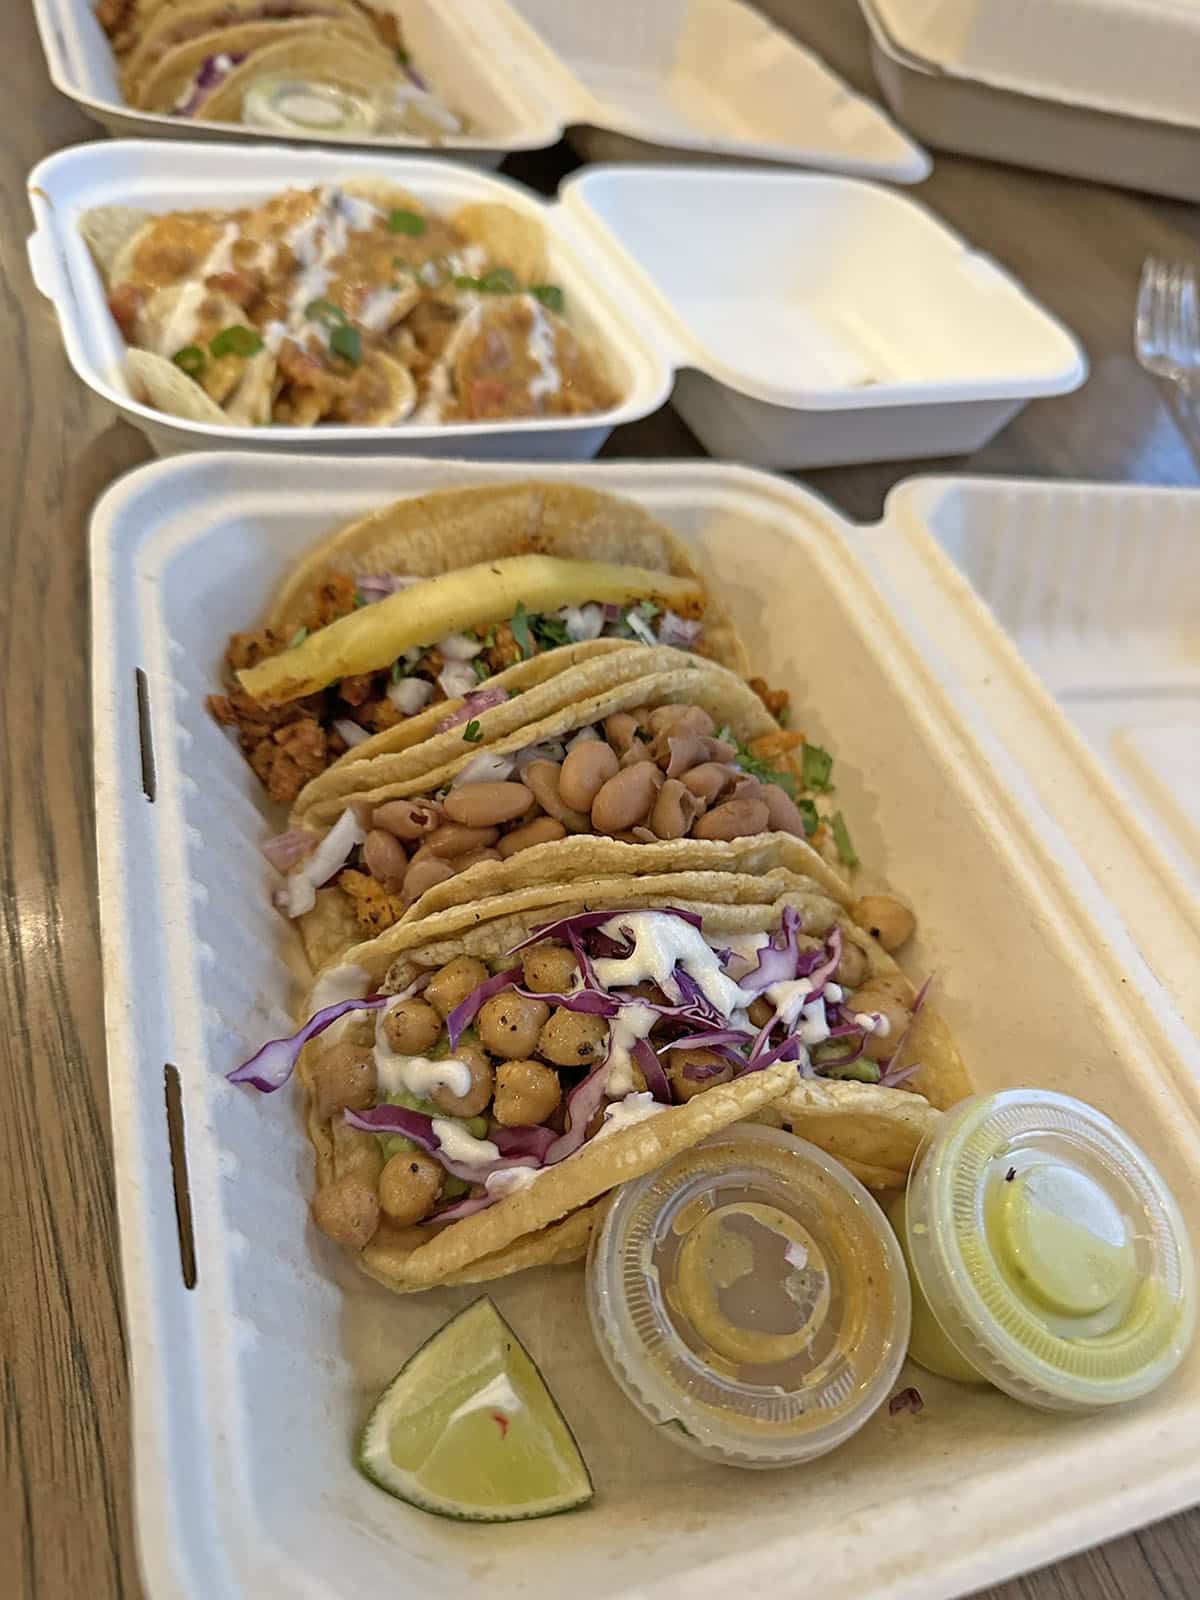 Chickpea tacos, pinto bean tacos, and soy tacos in cardboard container.